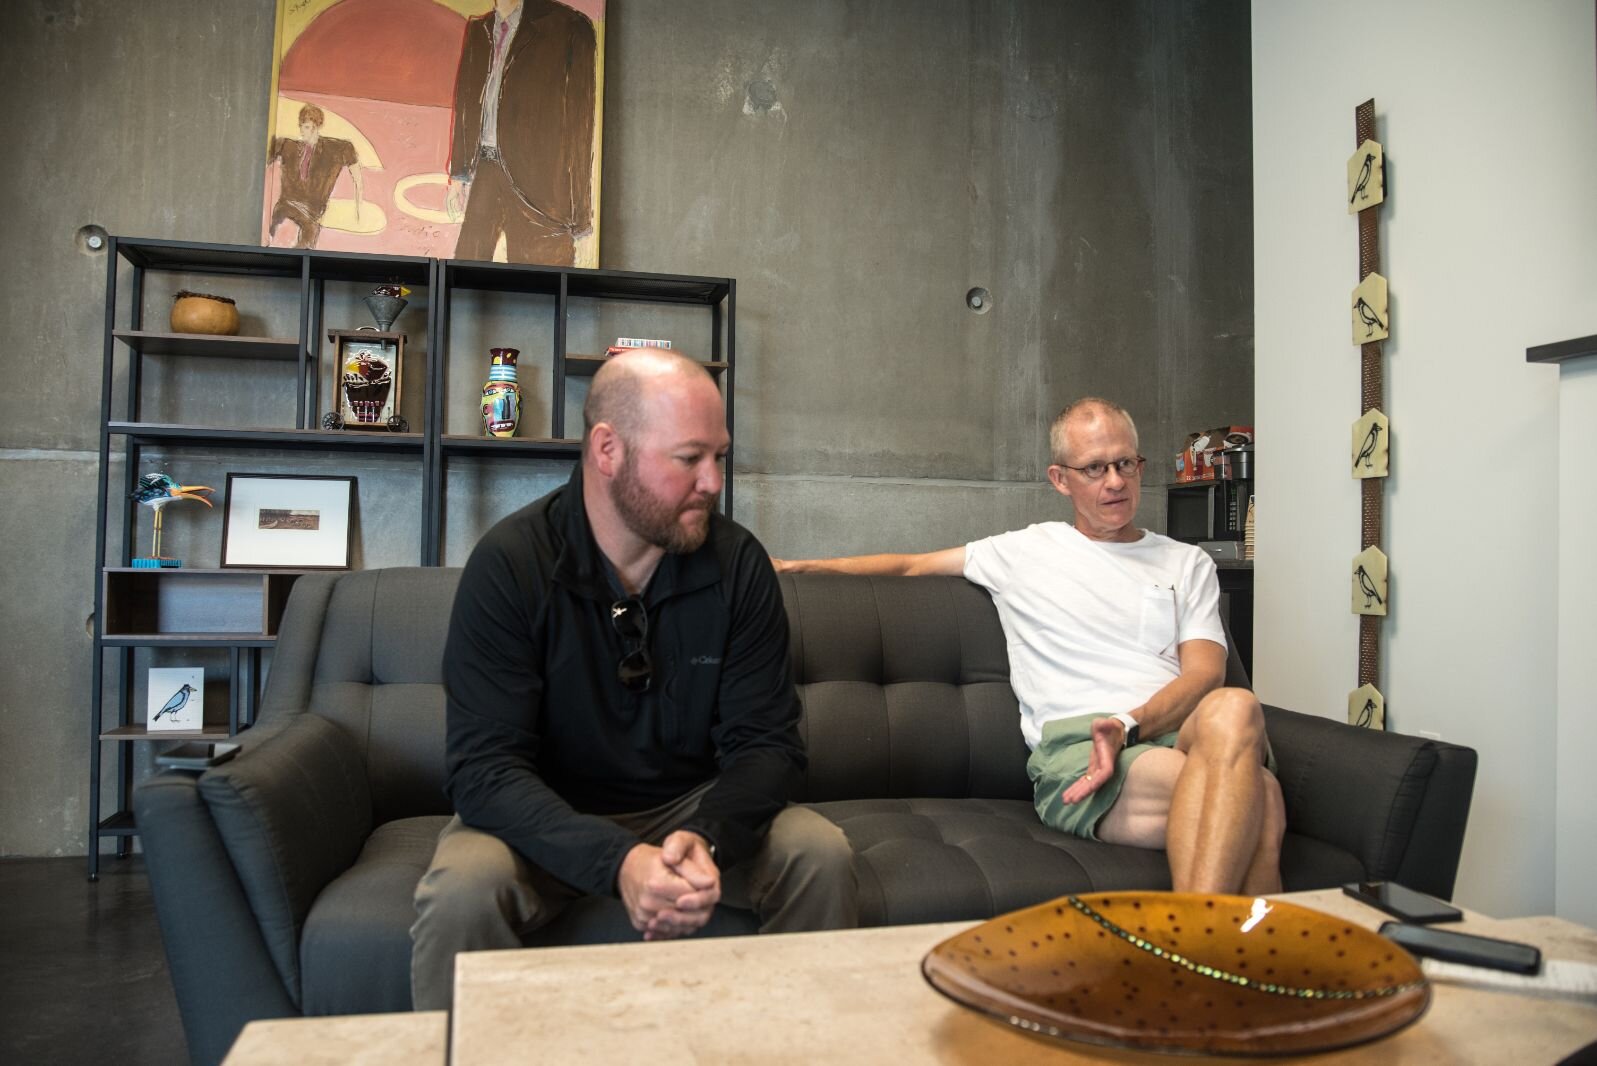 Garrett Seybert, left, and Jon Durham, right, sit in the lobby area of the Harrison Circle Apartments at 525 E. Ransom St. They are two of the four developers of the residential/commercial project.